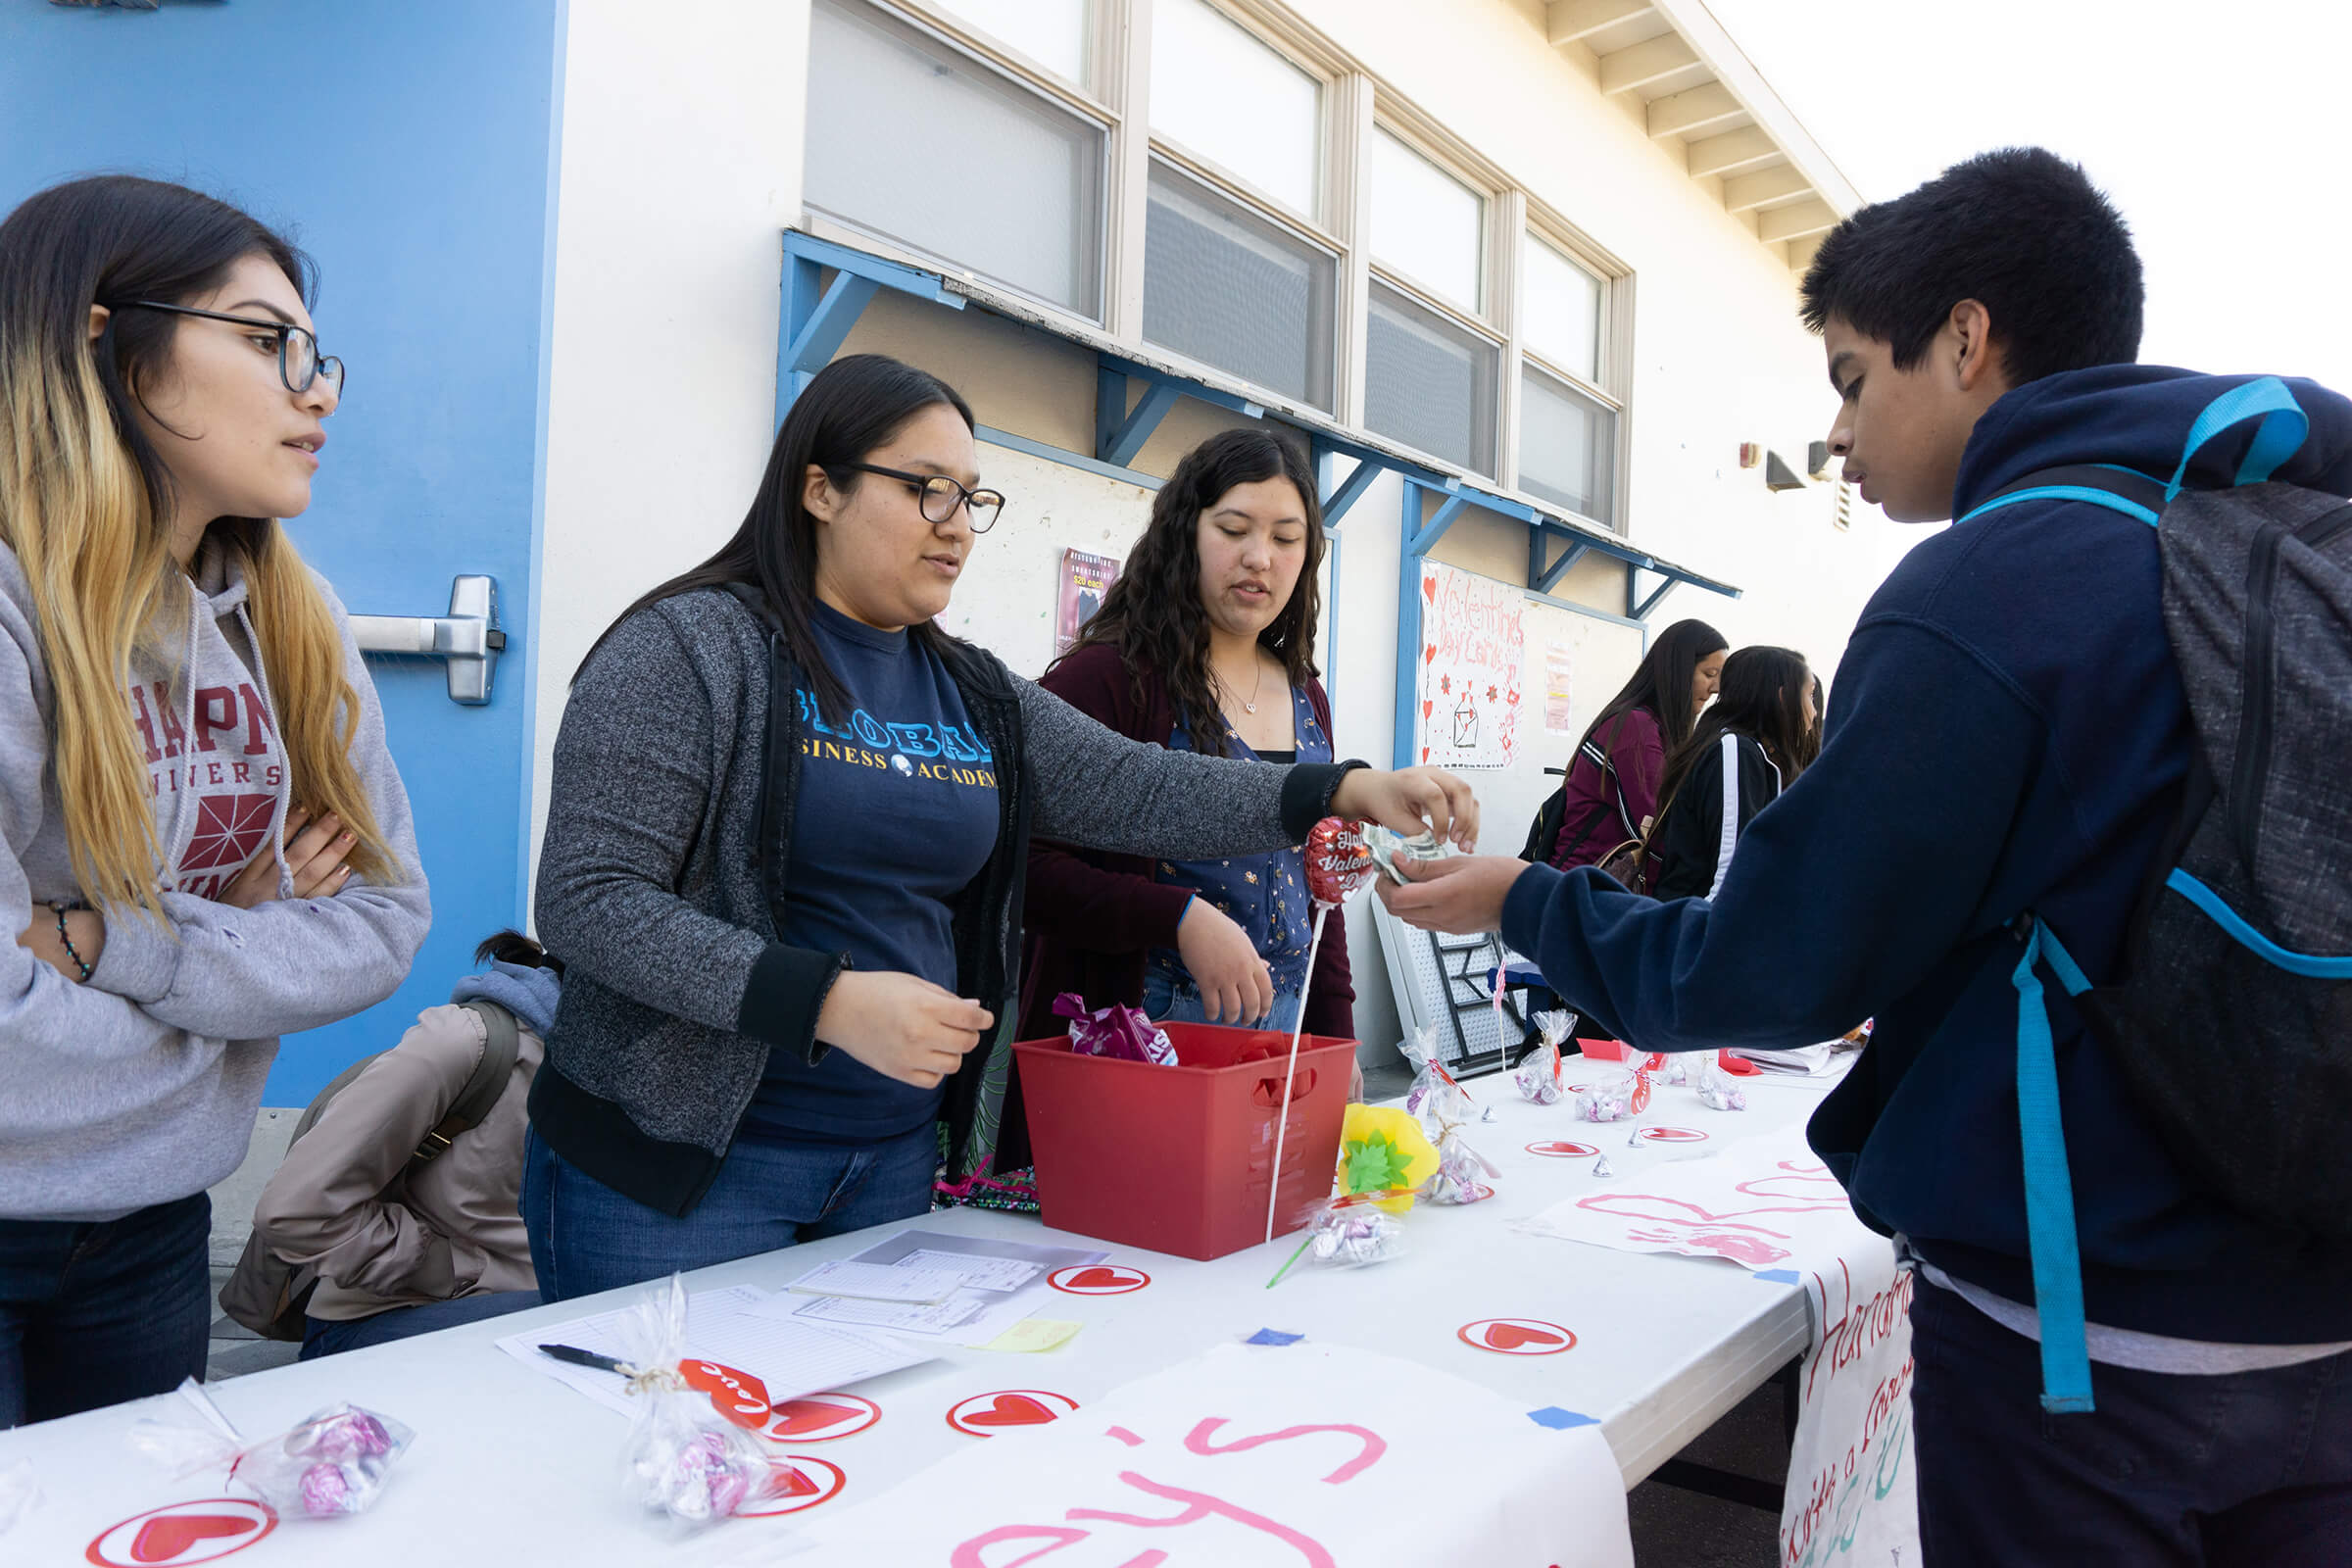 Global business students put on a fundraiser for Valentine's Day and facilitate purchasing and money transfer.